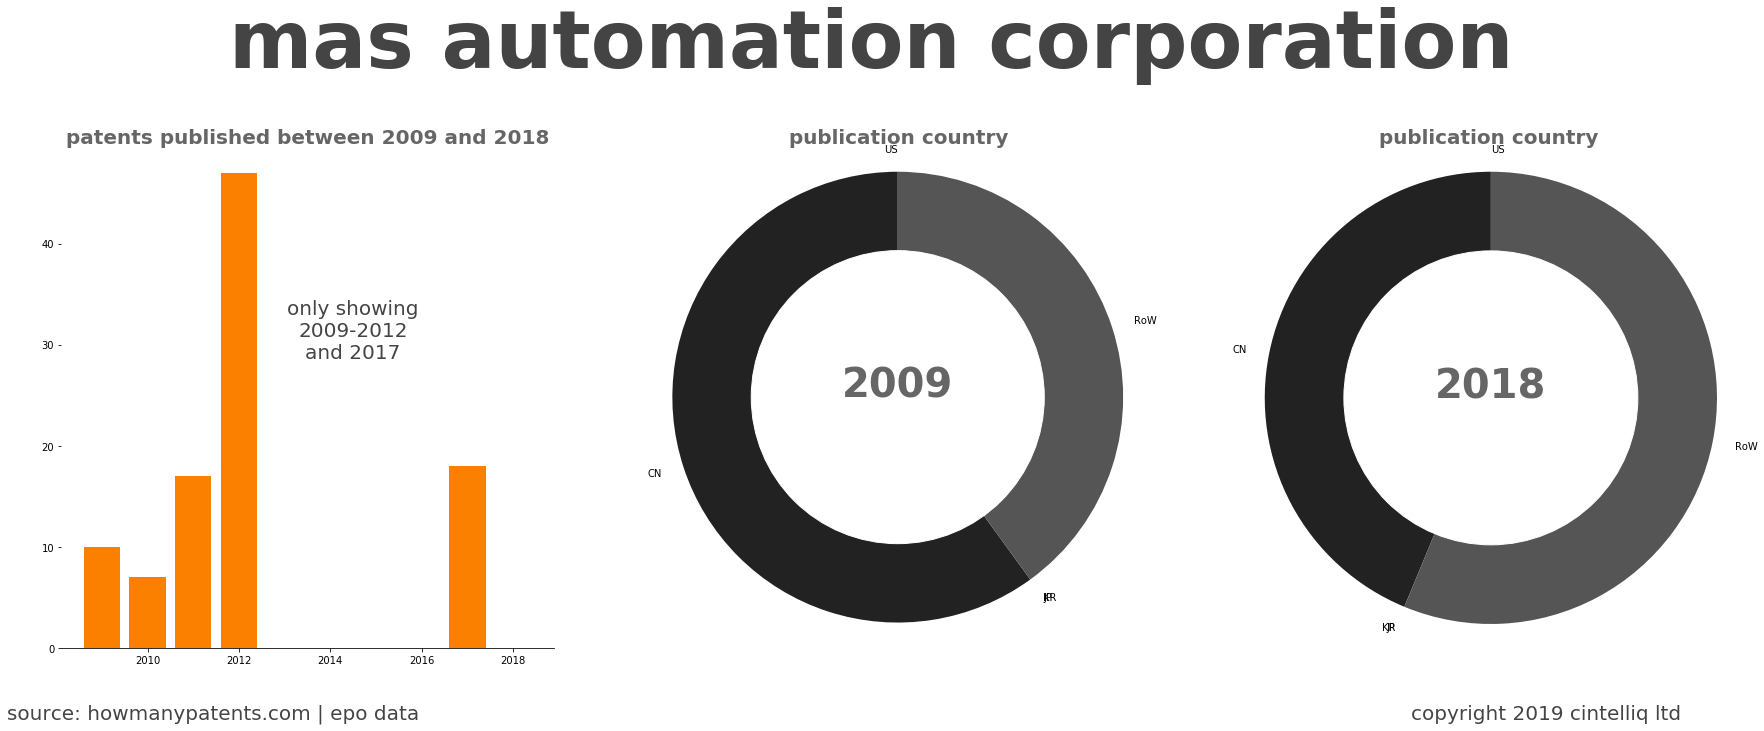 summary of patents for Mas Automation Corporation